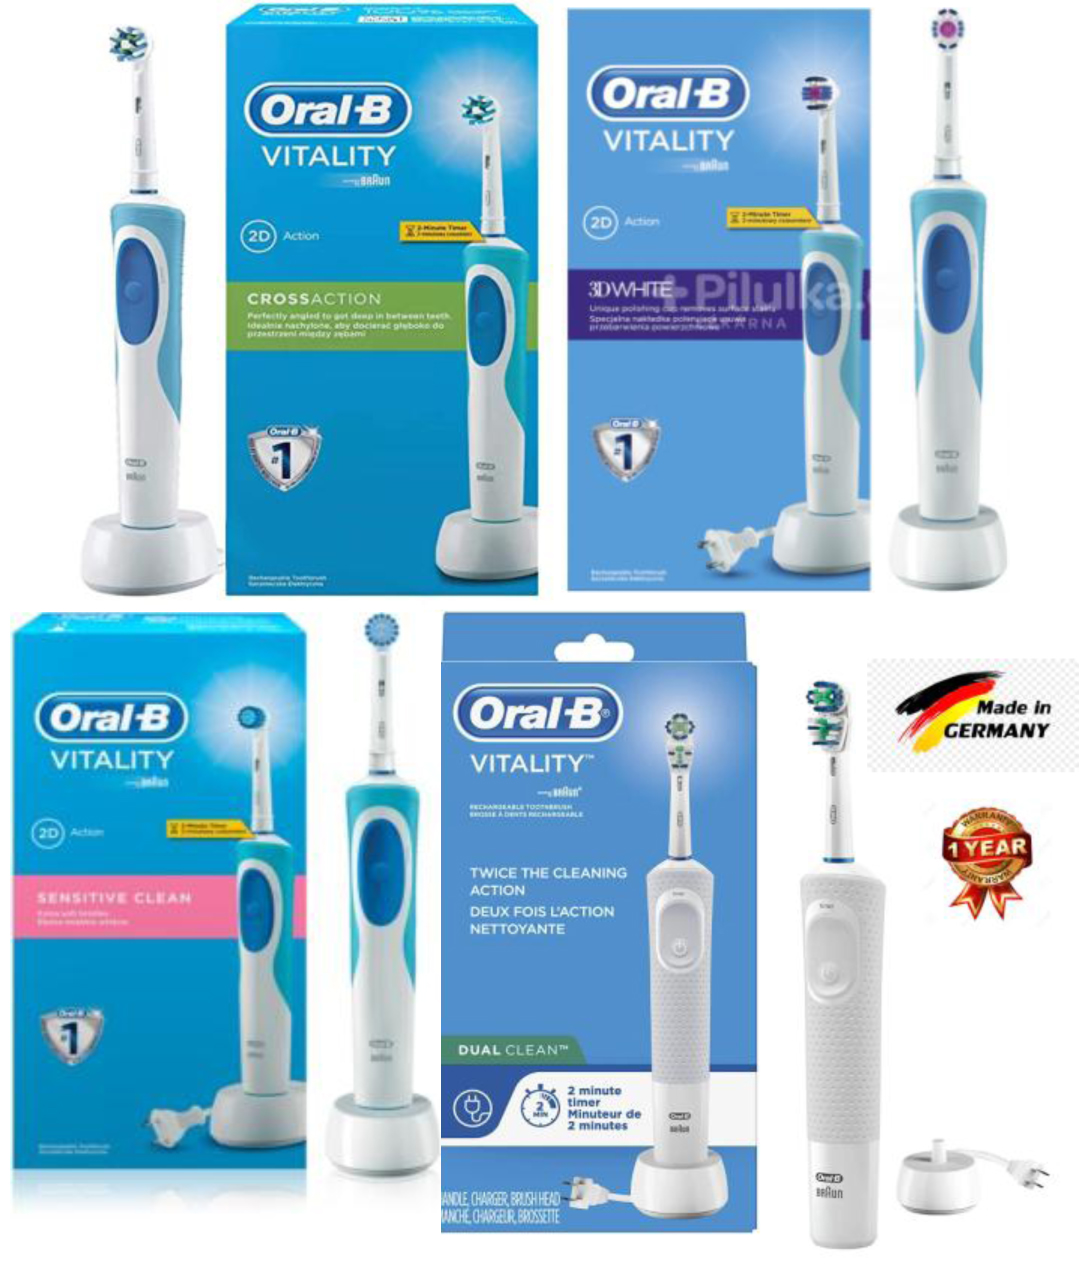 Oral-B Braun Electric Toothbrush Vitality (MADE IN GERMANY) 2 Min. Timer, 4 different Brush Heads